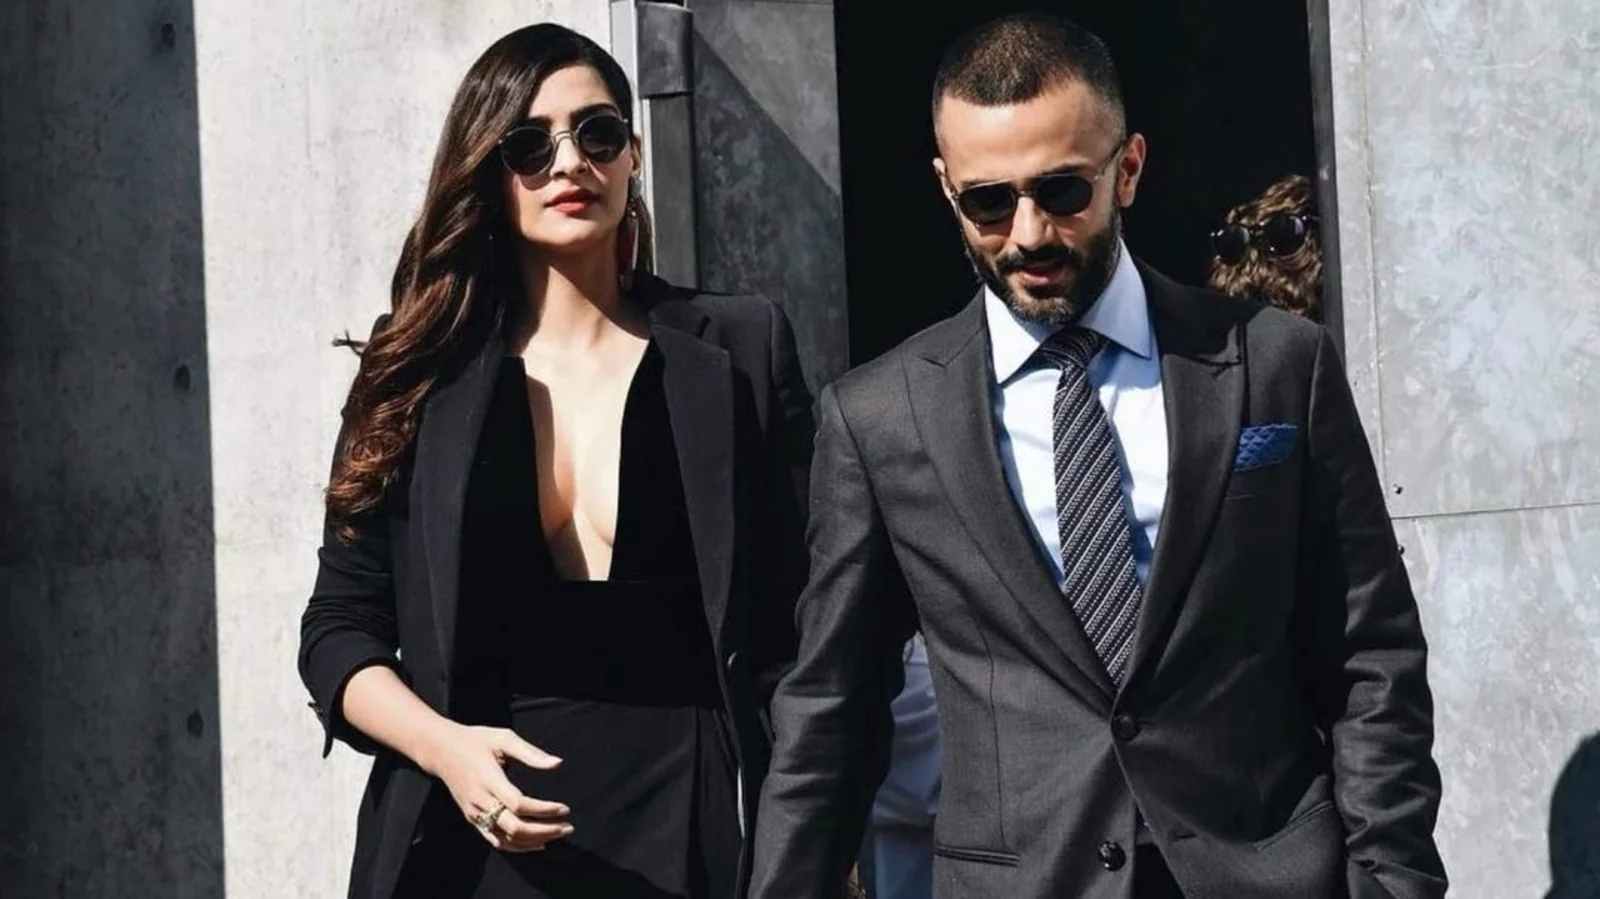 Cash, jewellery worth ₹2.4 cr stolen from Sonam Kapoor, her husband Anand Ahuja’s New Delhi house